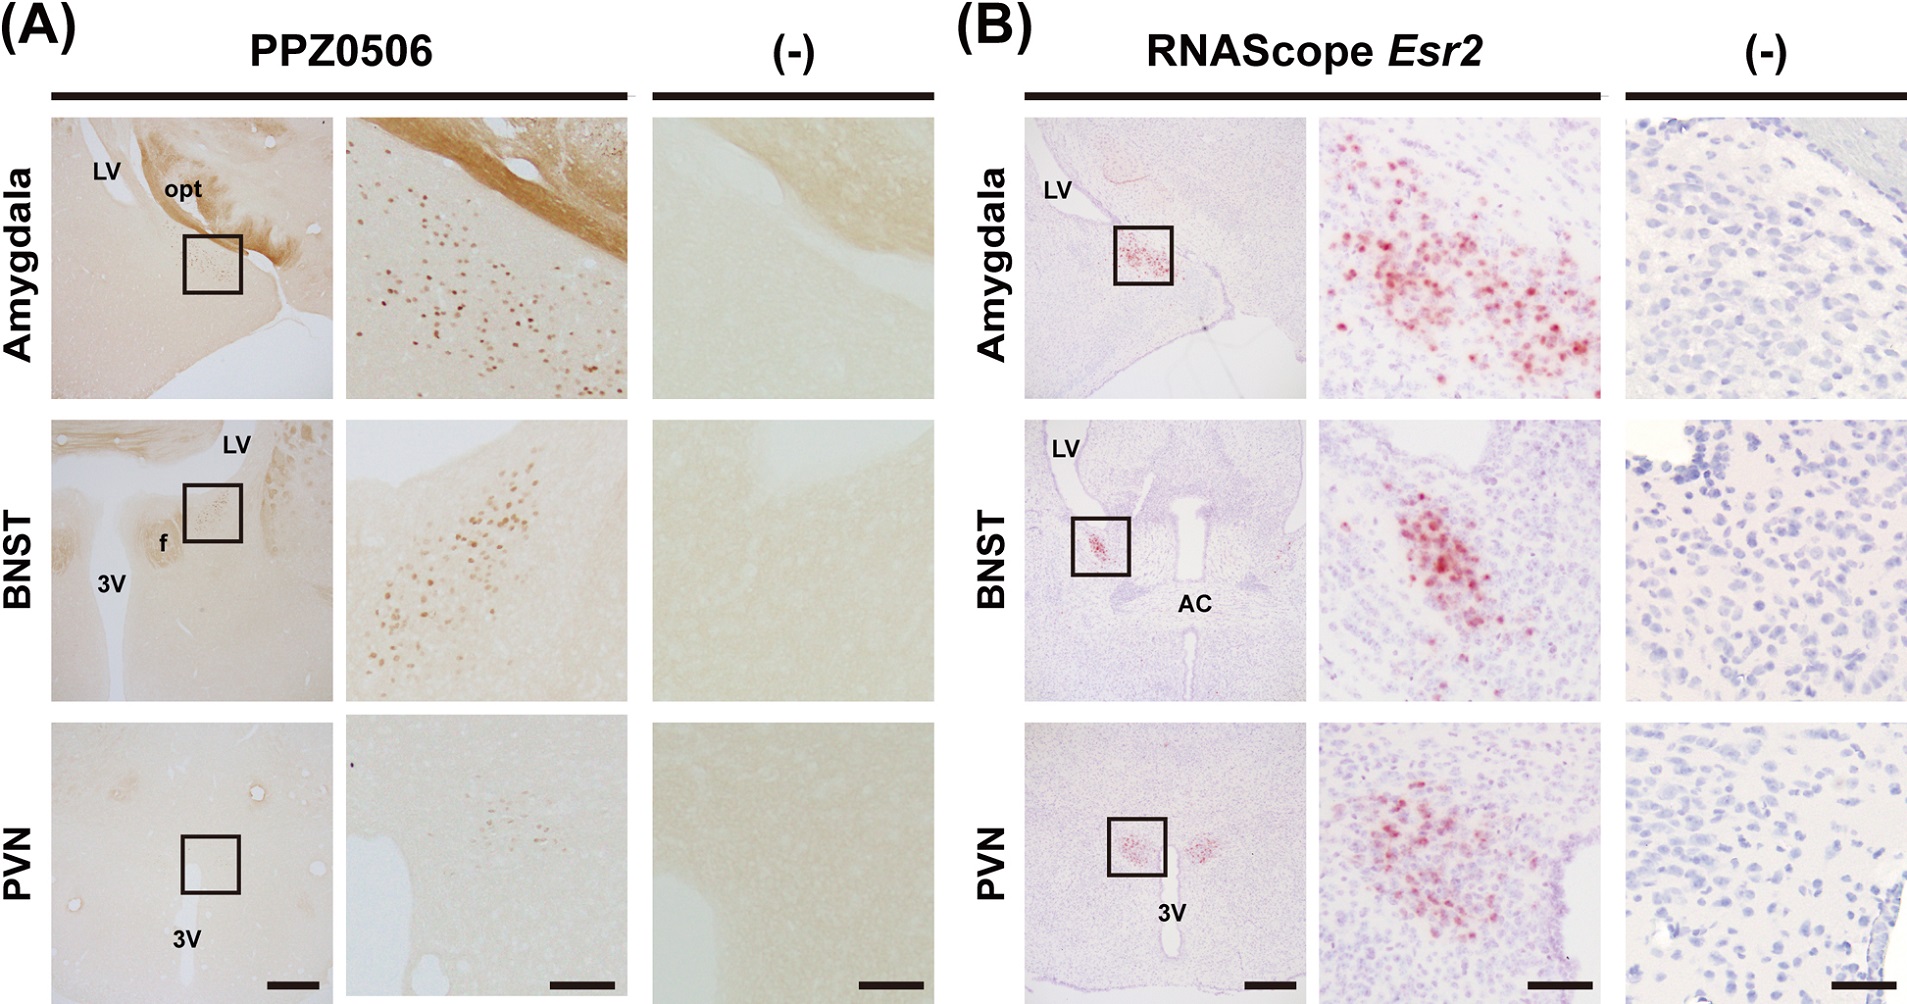 Optimized Mouse-on-mouse Immunohistochemical Detection of Mouse ESR2 Proteins with PPZ0506 Monoclonal Antibody